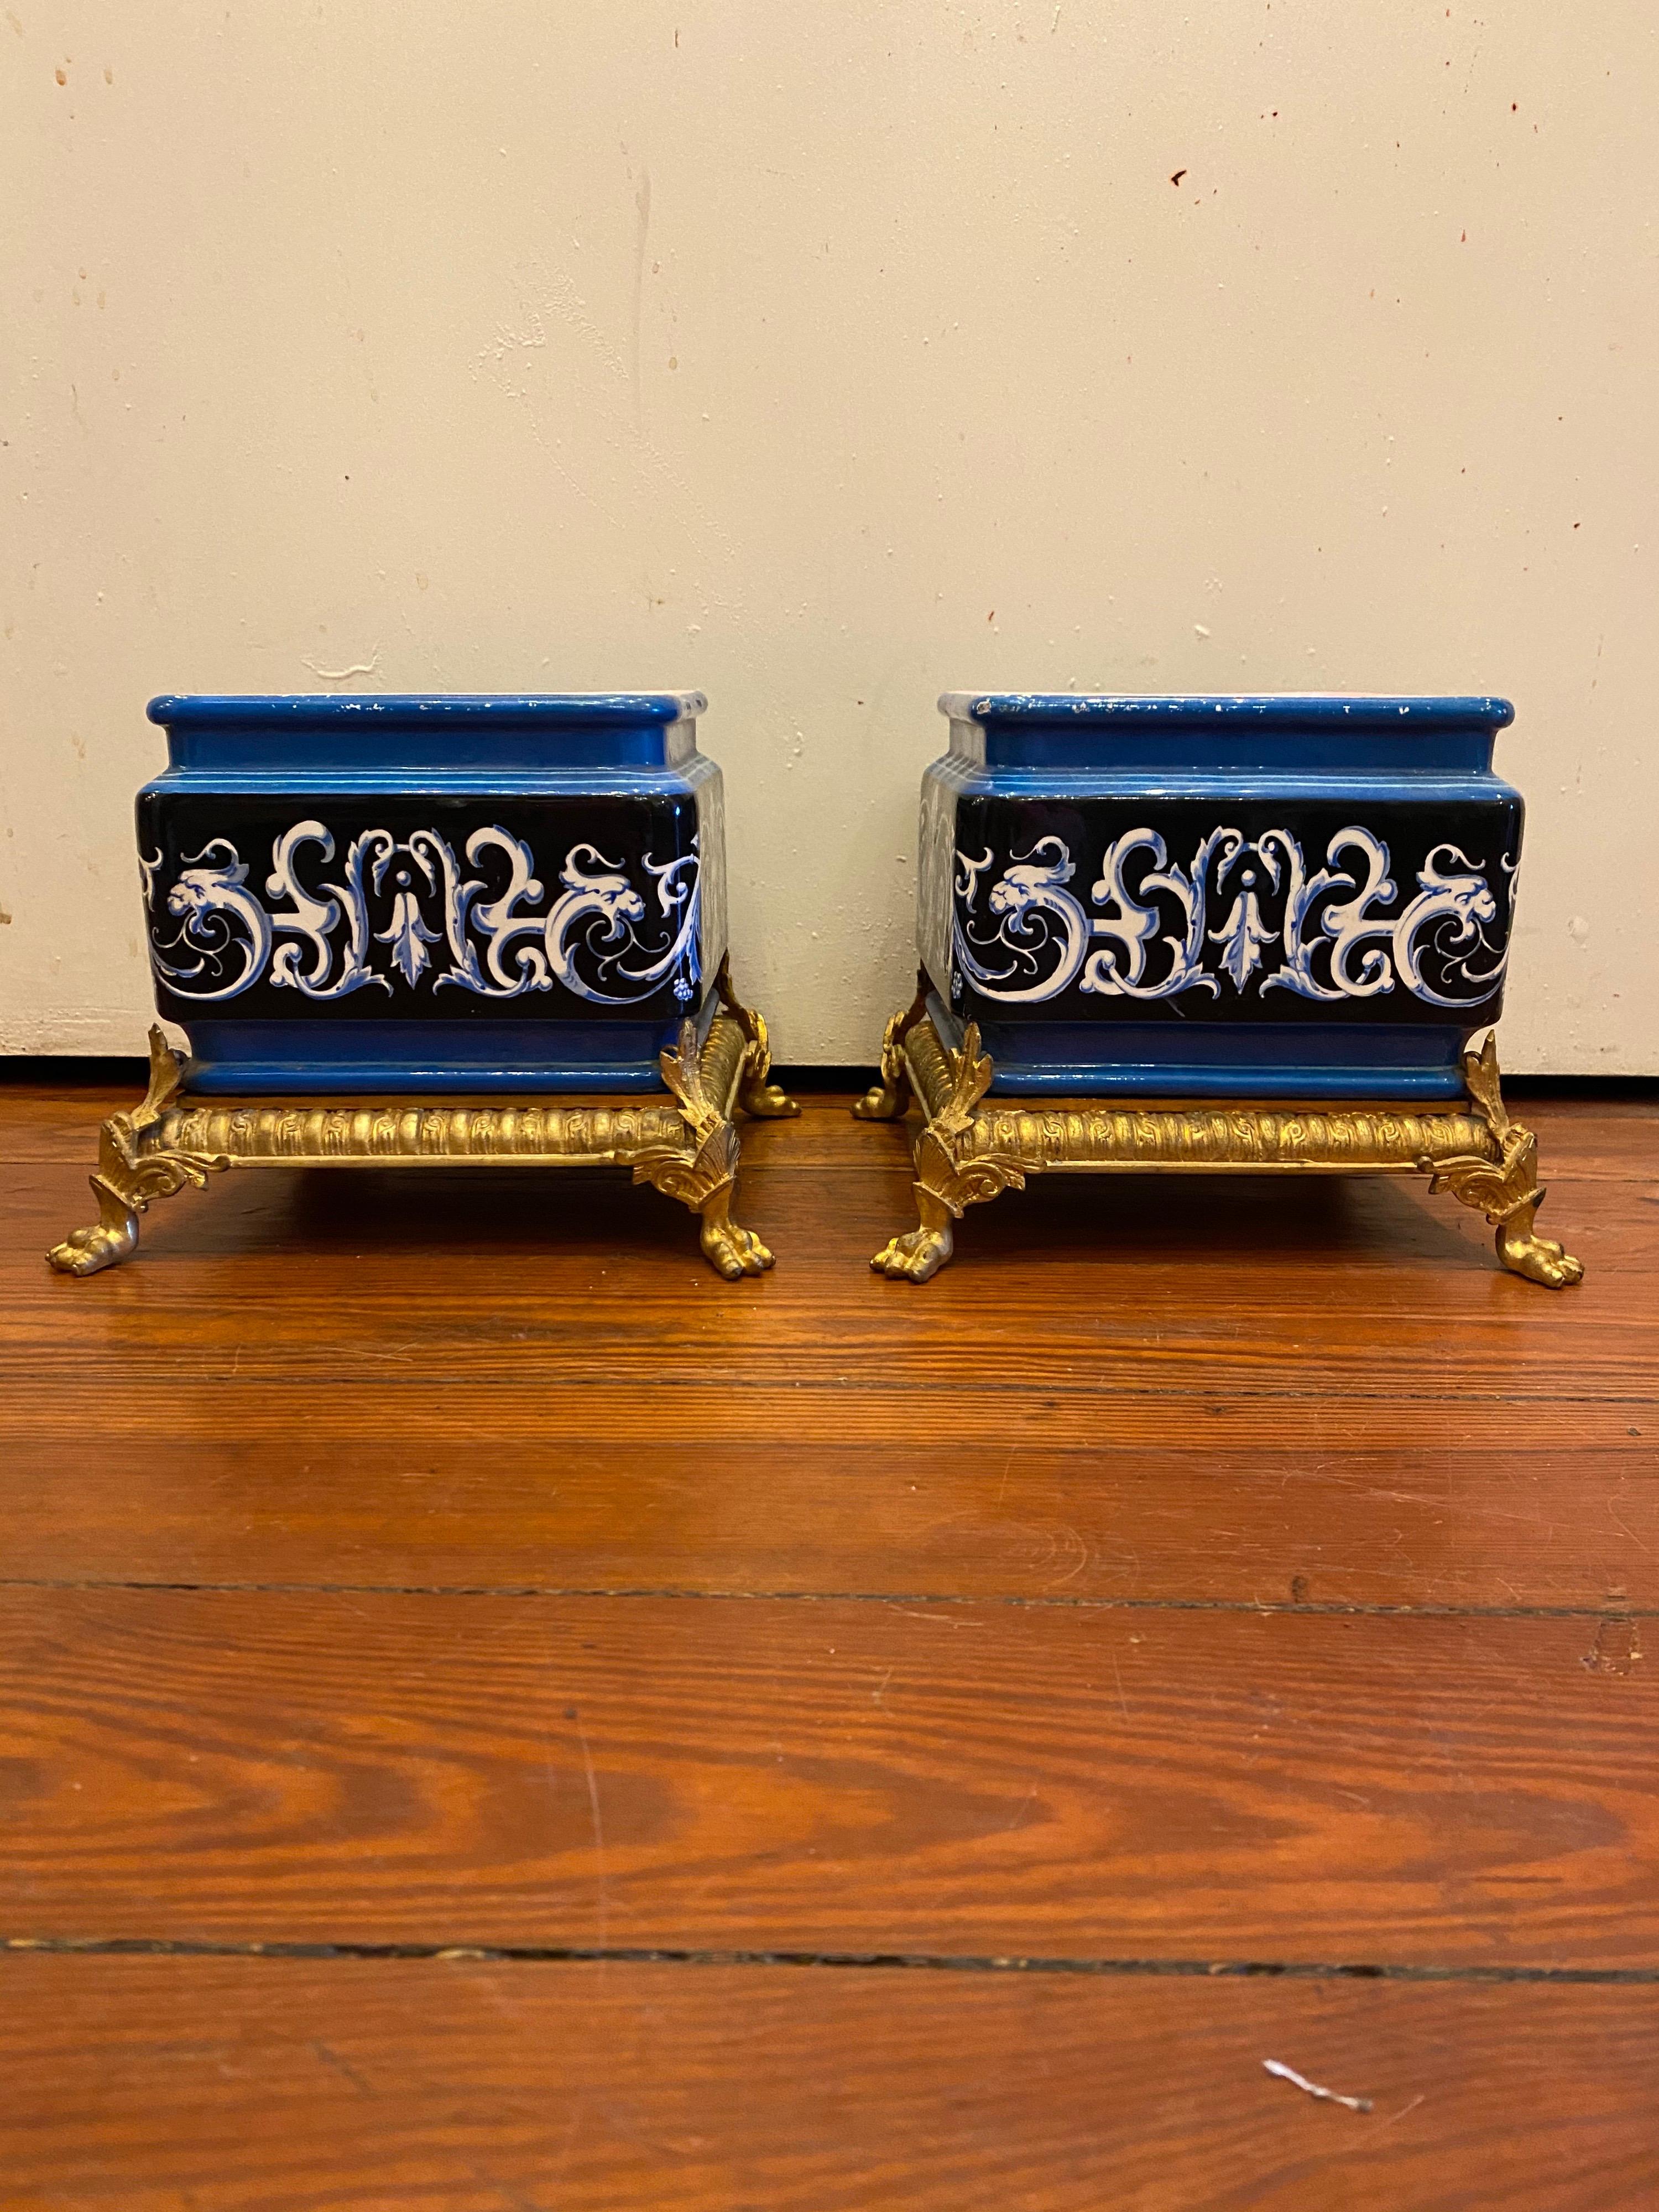 Pair of French Majolica jardinière of unusual blue with white and black decoration and pink interiors. They have exceptional gilt bronze mounted bases.